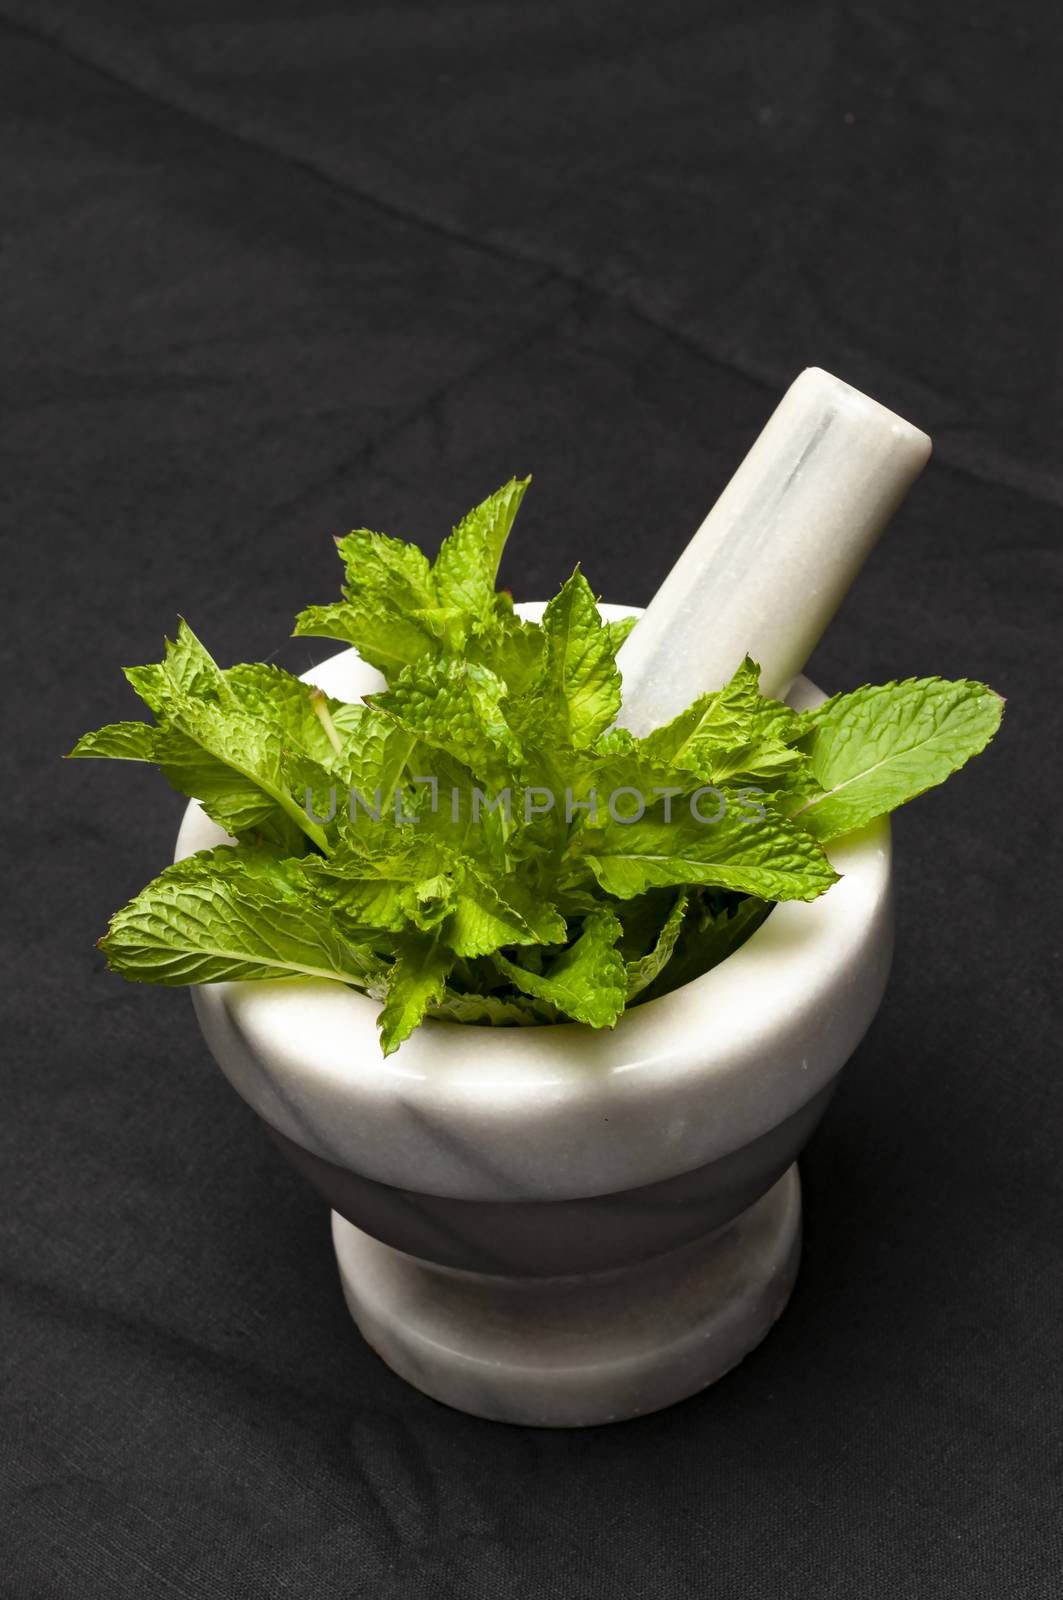 Peppermint leaves waiting in marble mortar by Haspion